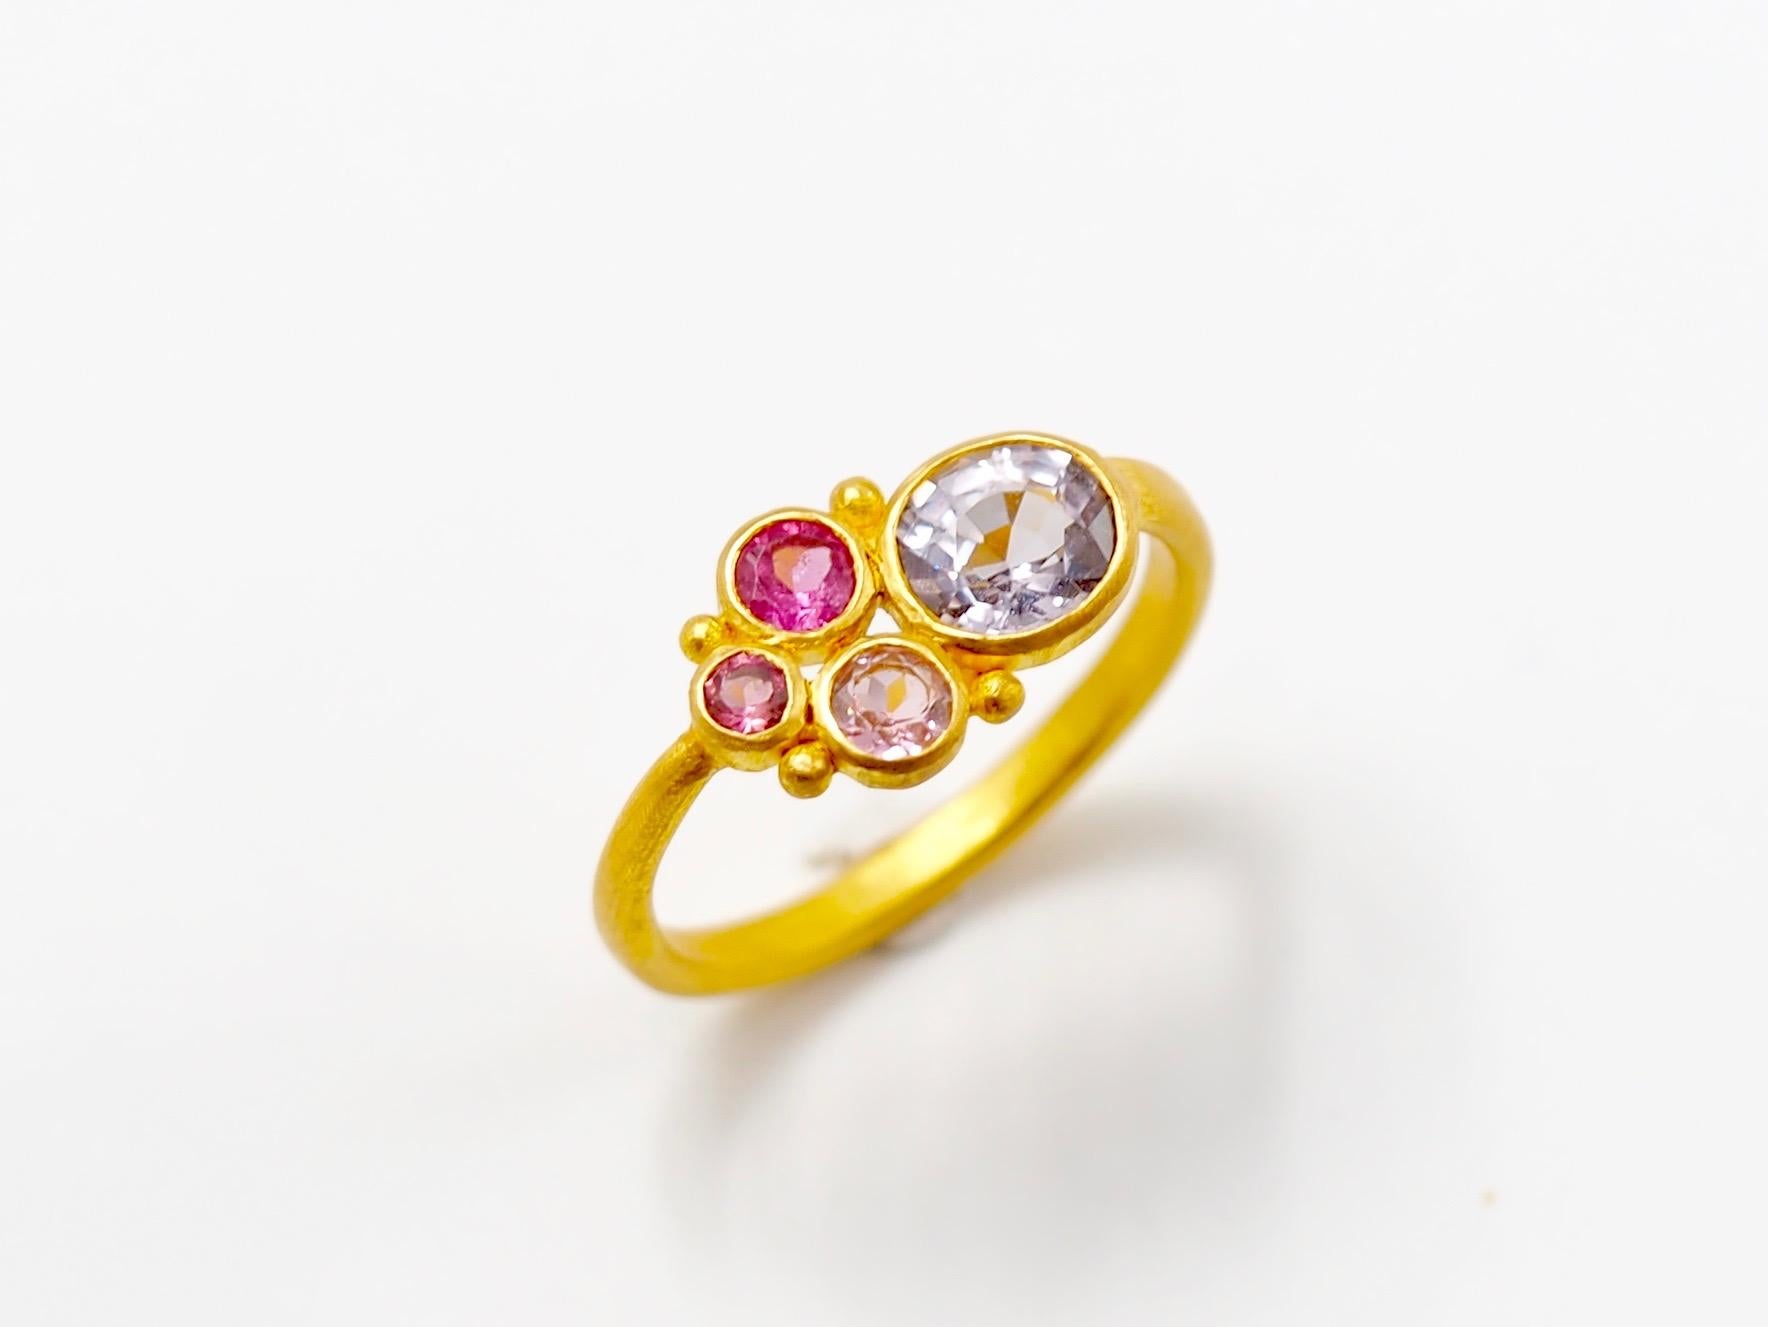 This one-of-a-kind ring by Scrives is composed of a light grey spinel of 1.04 cts and 3 tourmalines of 3 hues of pink. All 4 stones have different sizes. The colour of the grey spinel is original and rare, a pure light grey.   

The stones are set